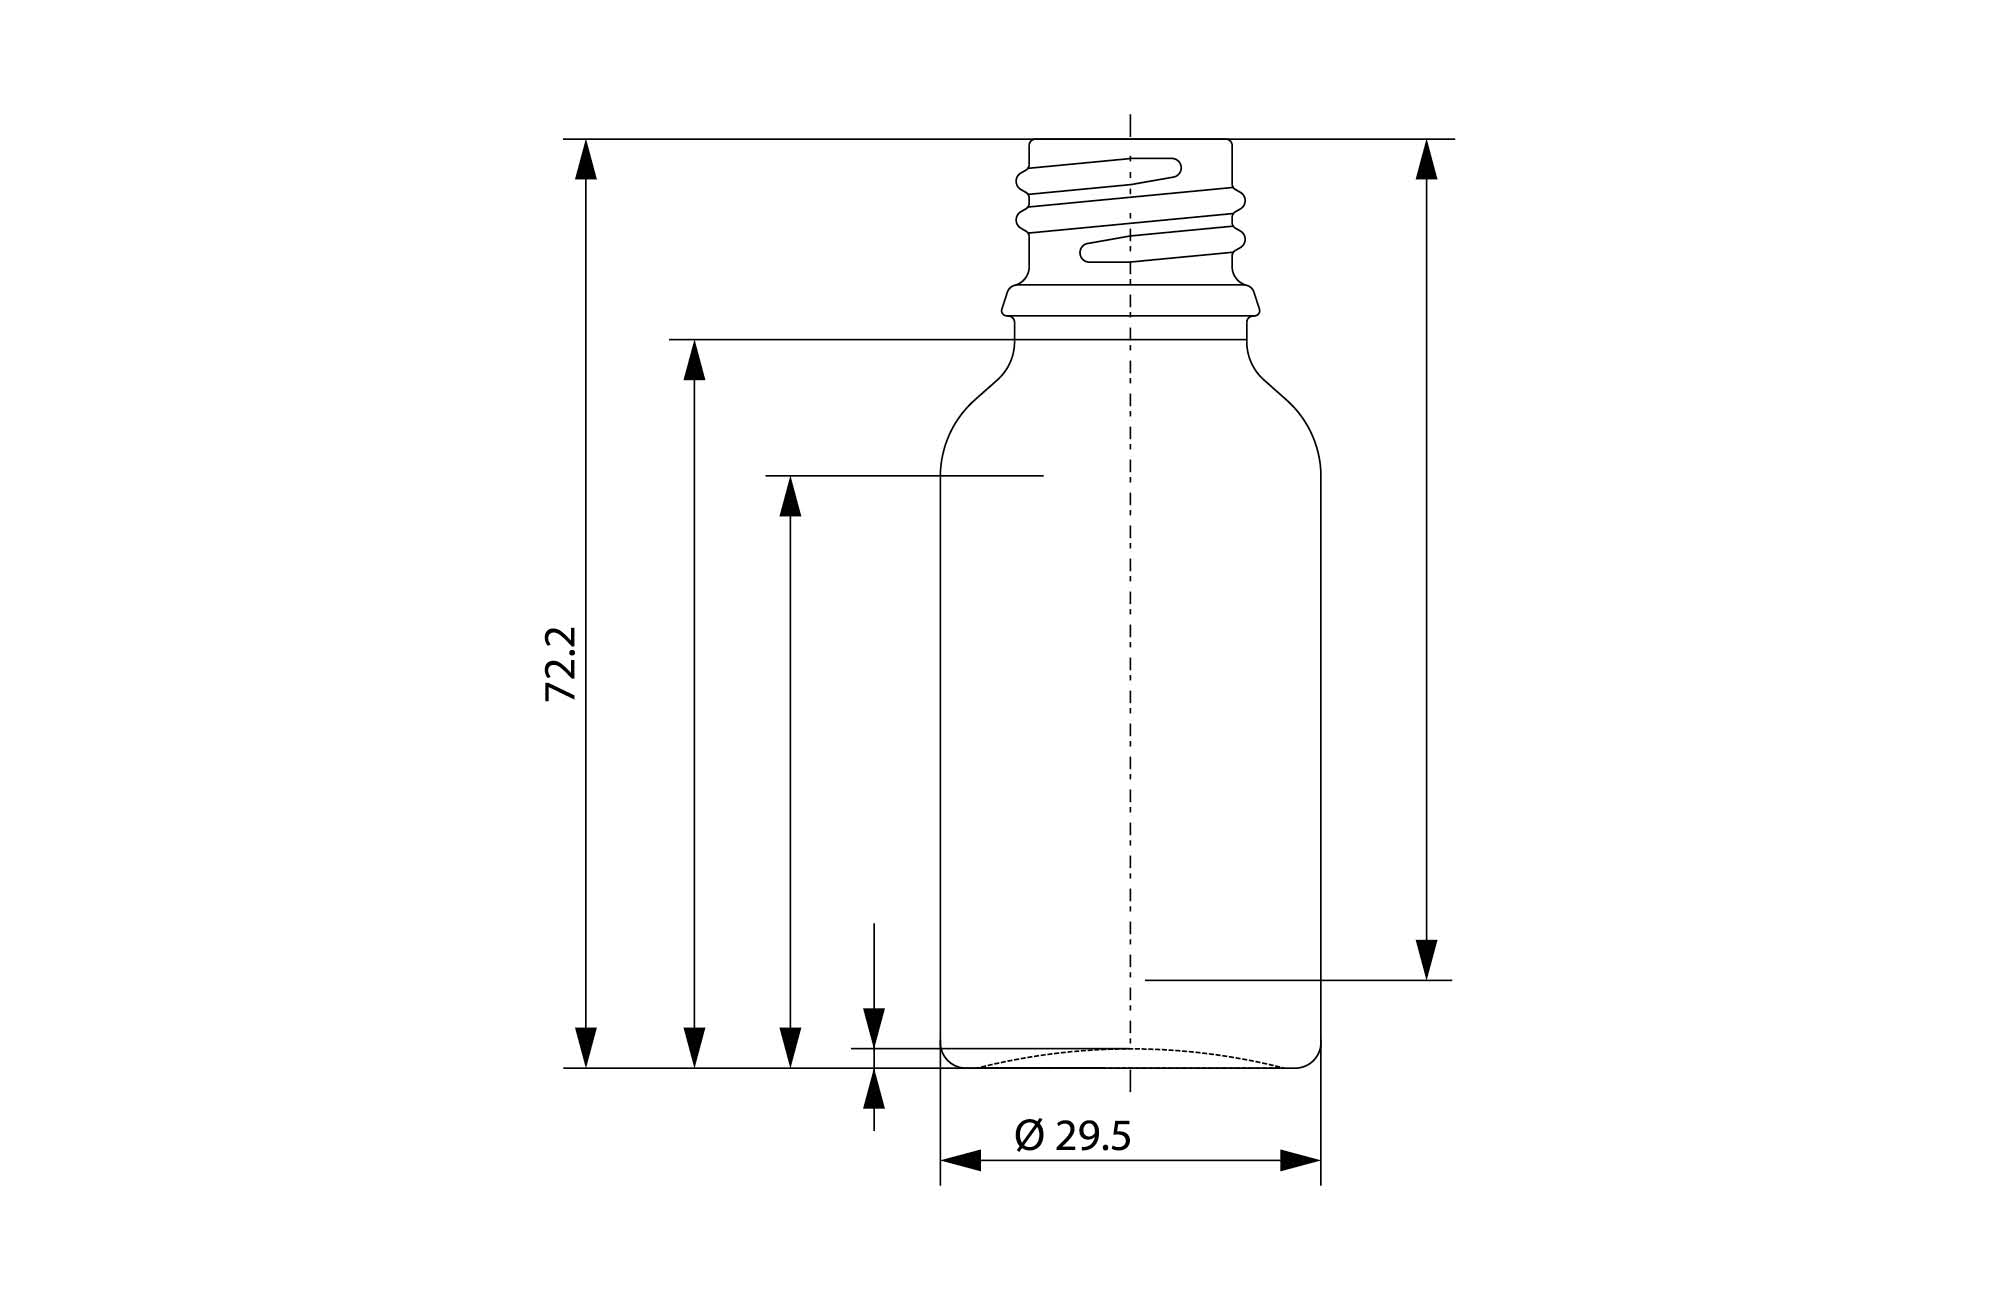 Technical drawing of a new designed bottle